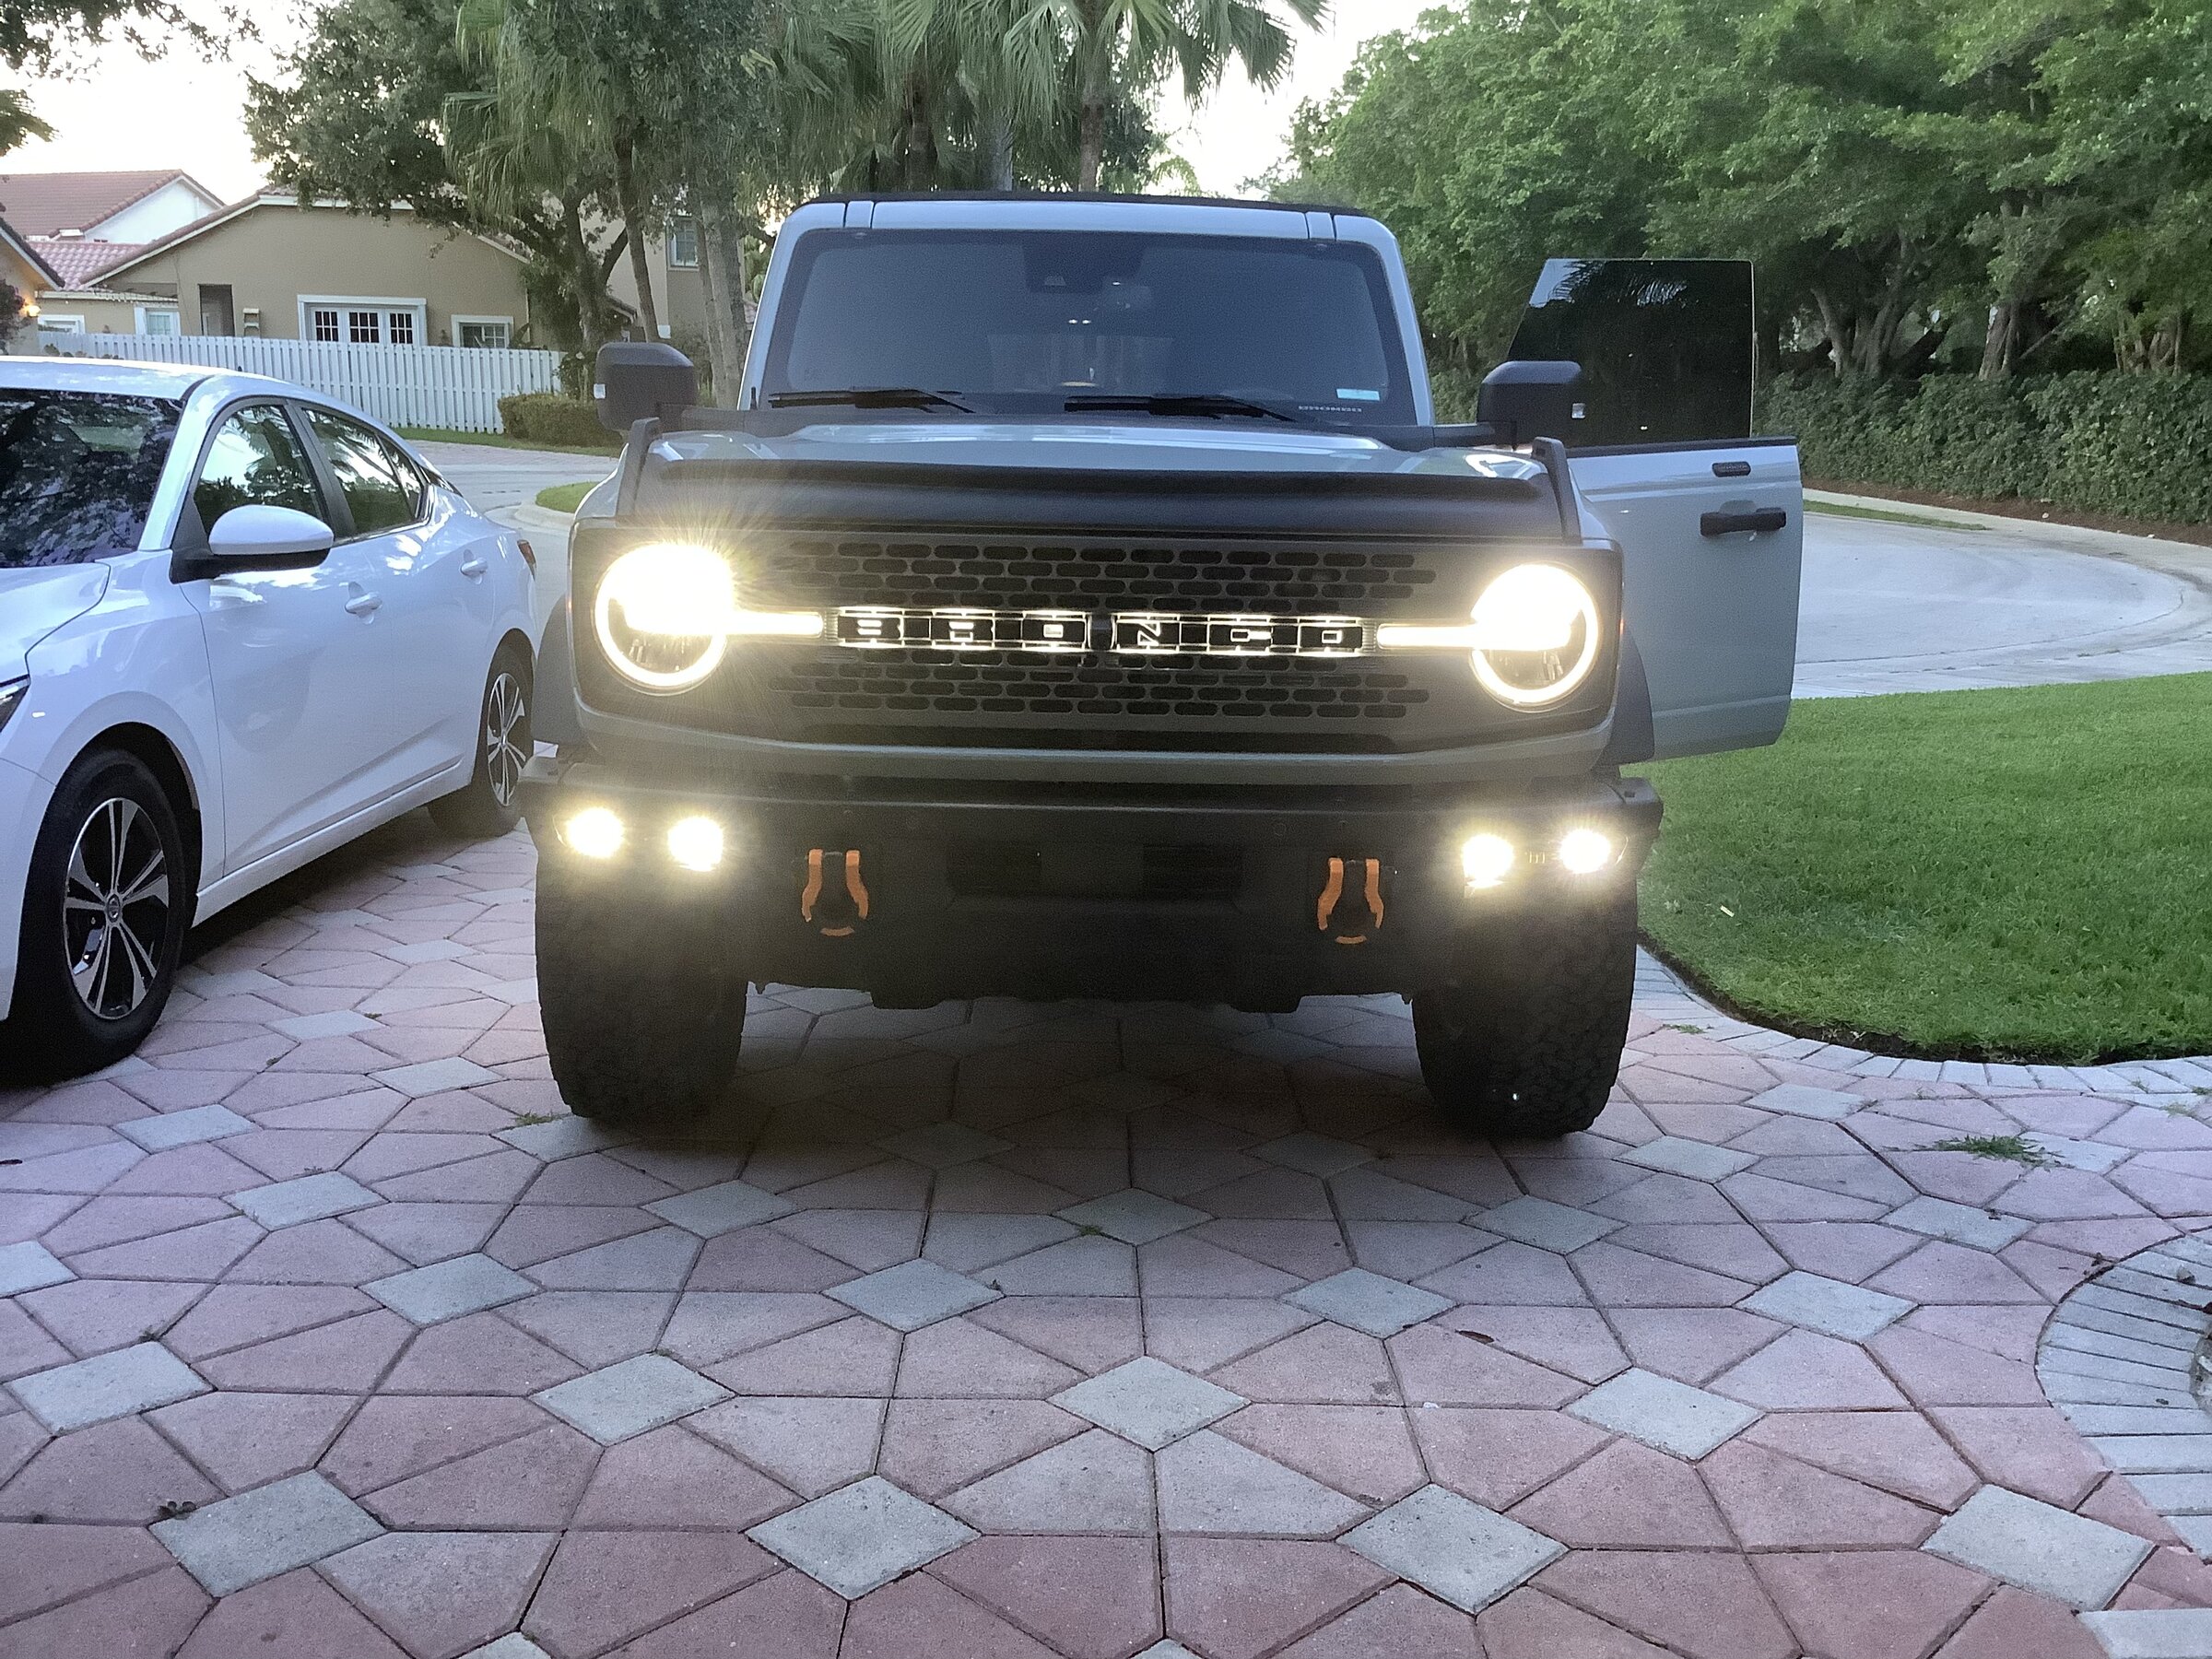 Ford Bronco IN STOCK! Triple LED Fog Light Kit for MOD Bumper from ORACLE Lighting 717DF1D0-865D-4226-893C-8D52AED97E01